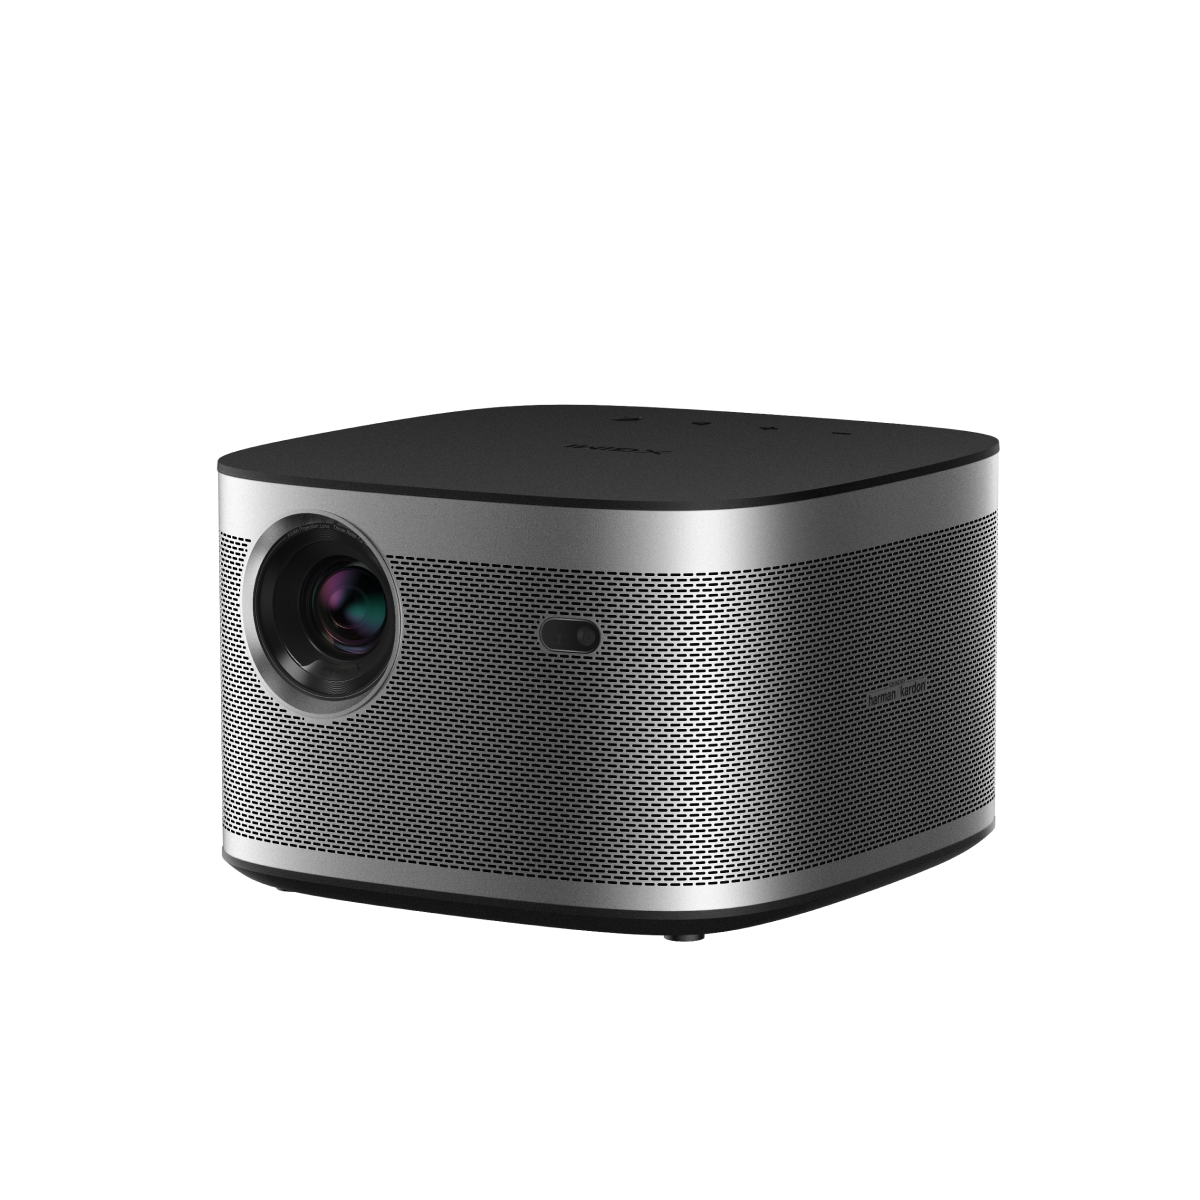 XGIMI HORIZON - True FHD Home Projector - lateral